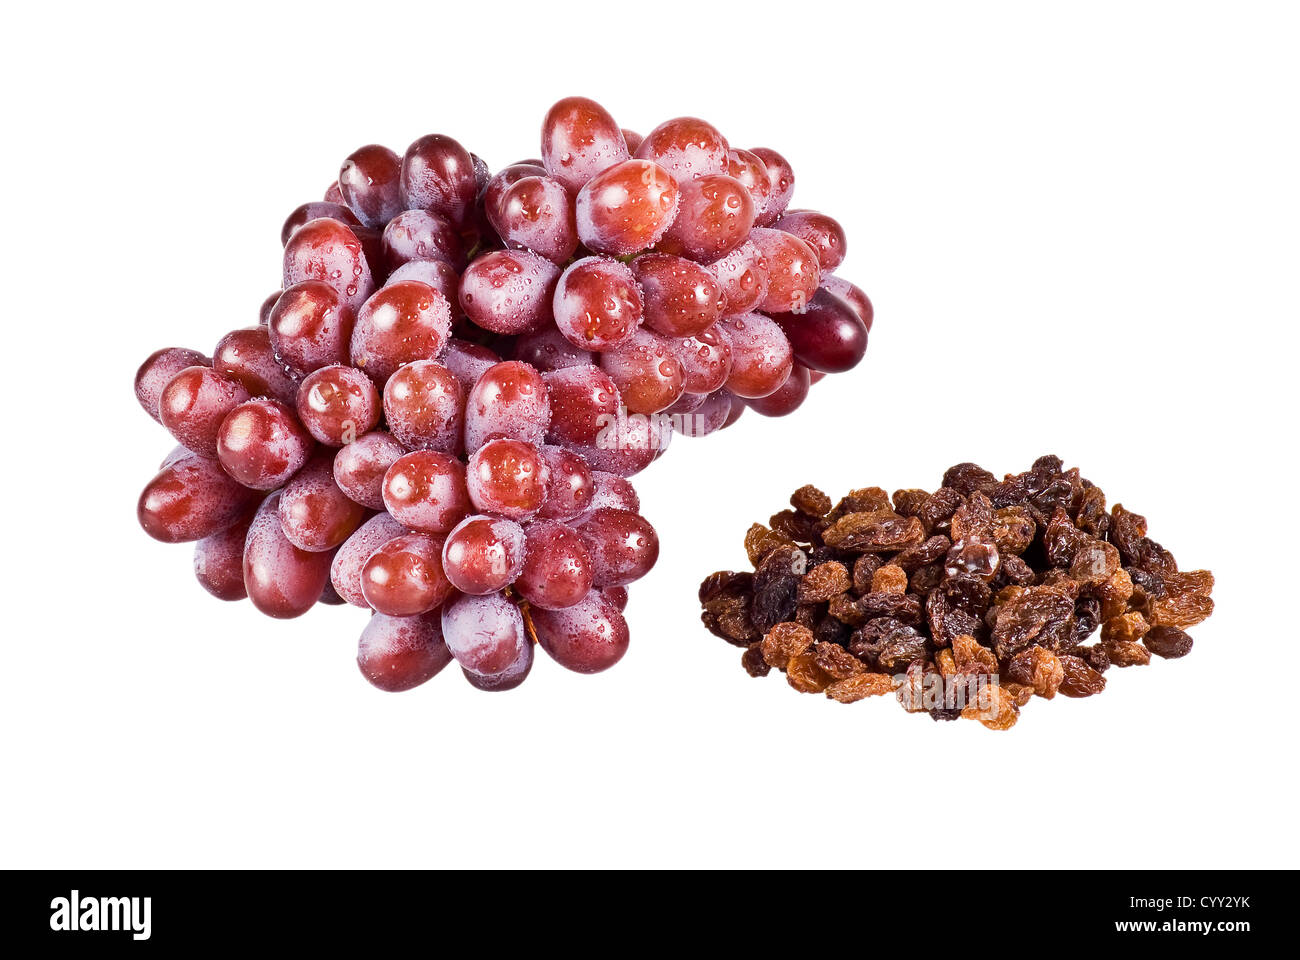 Bunch of red grapes and raisins on white background Stock Photo